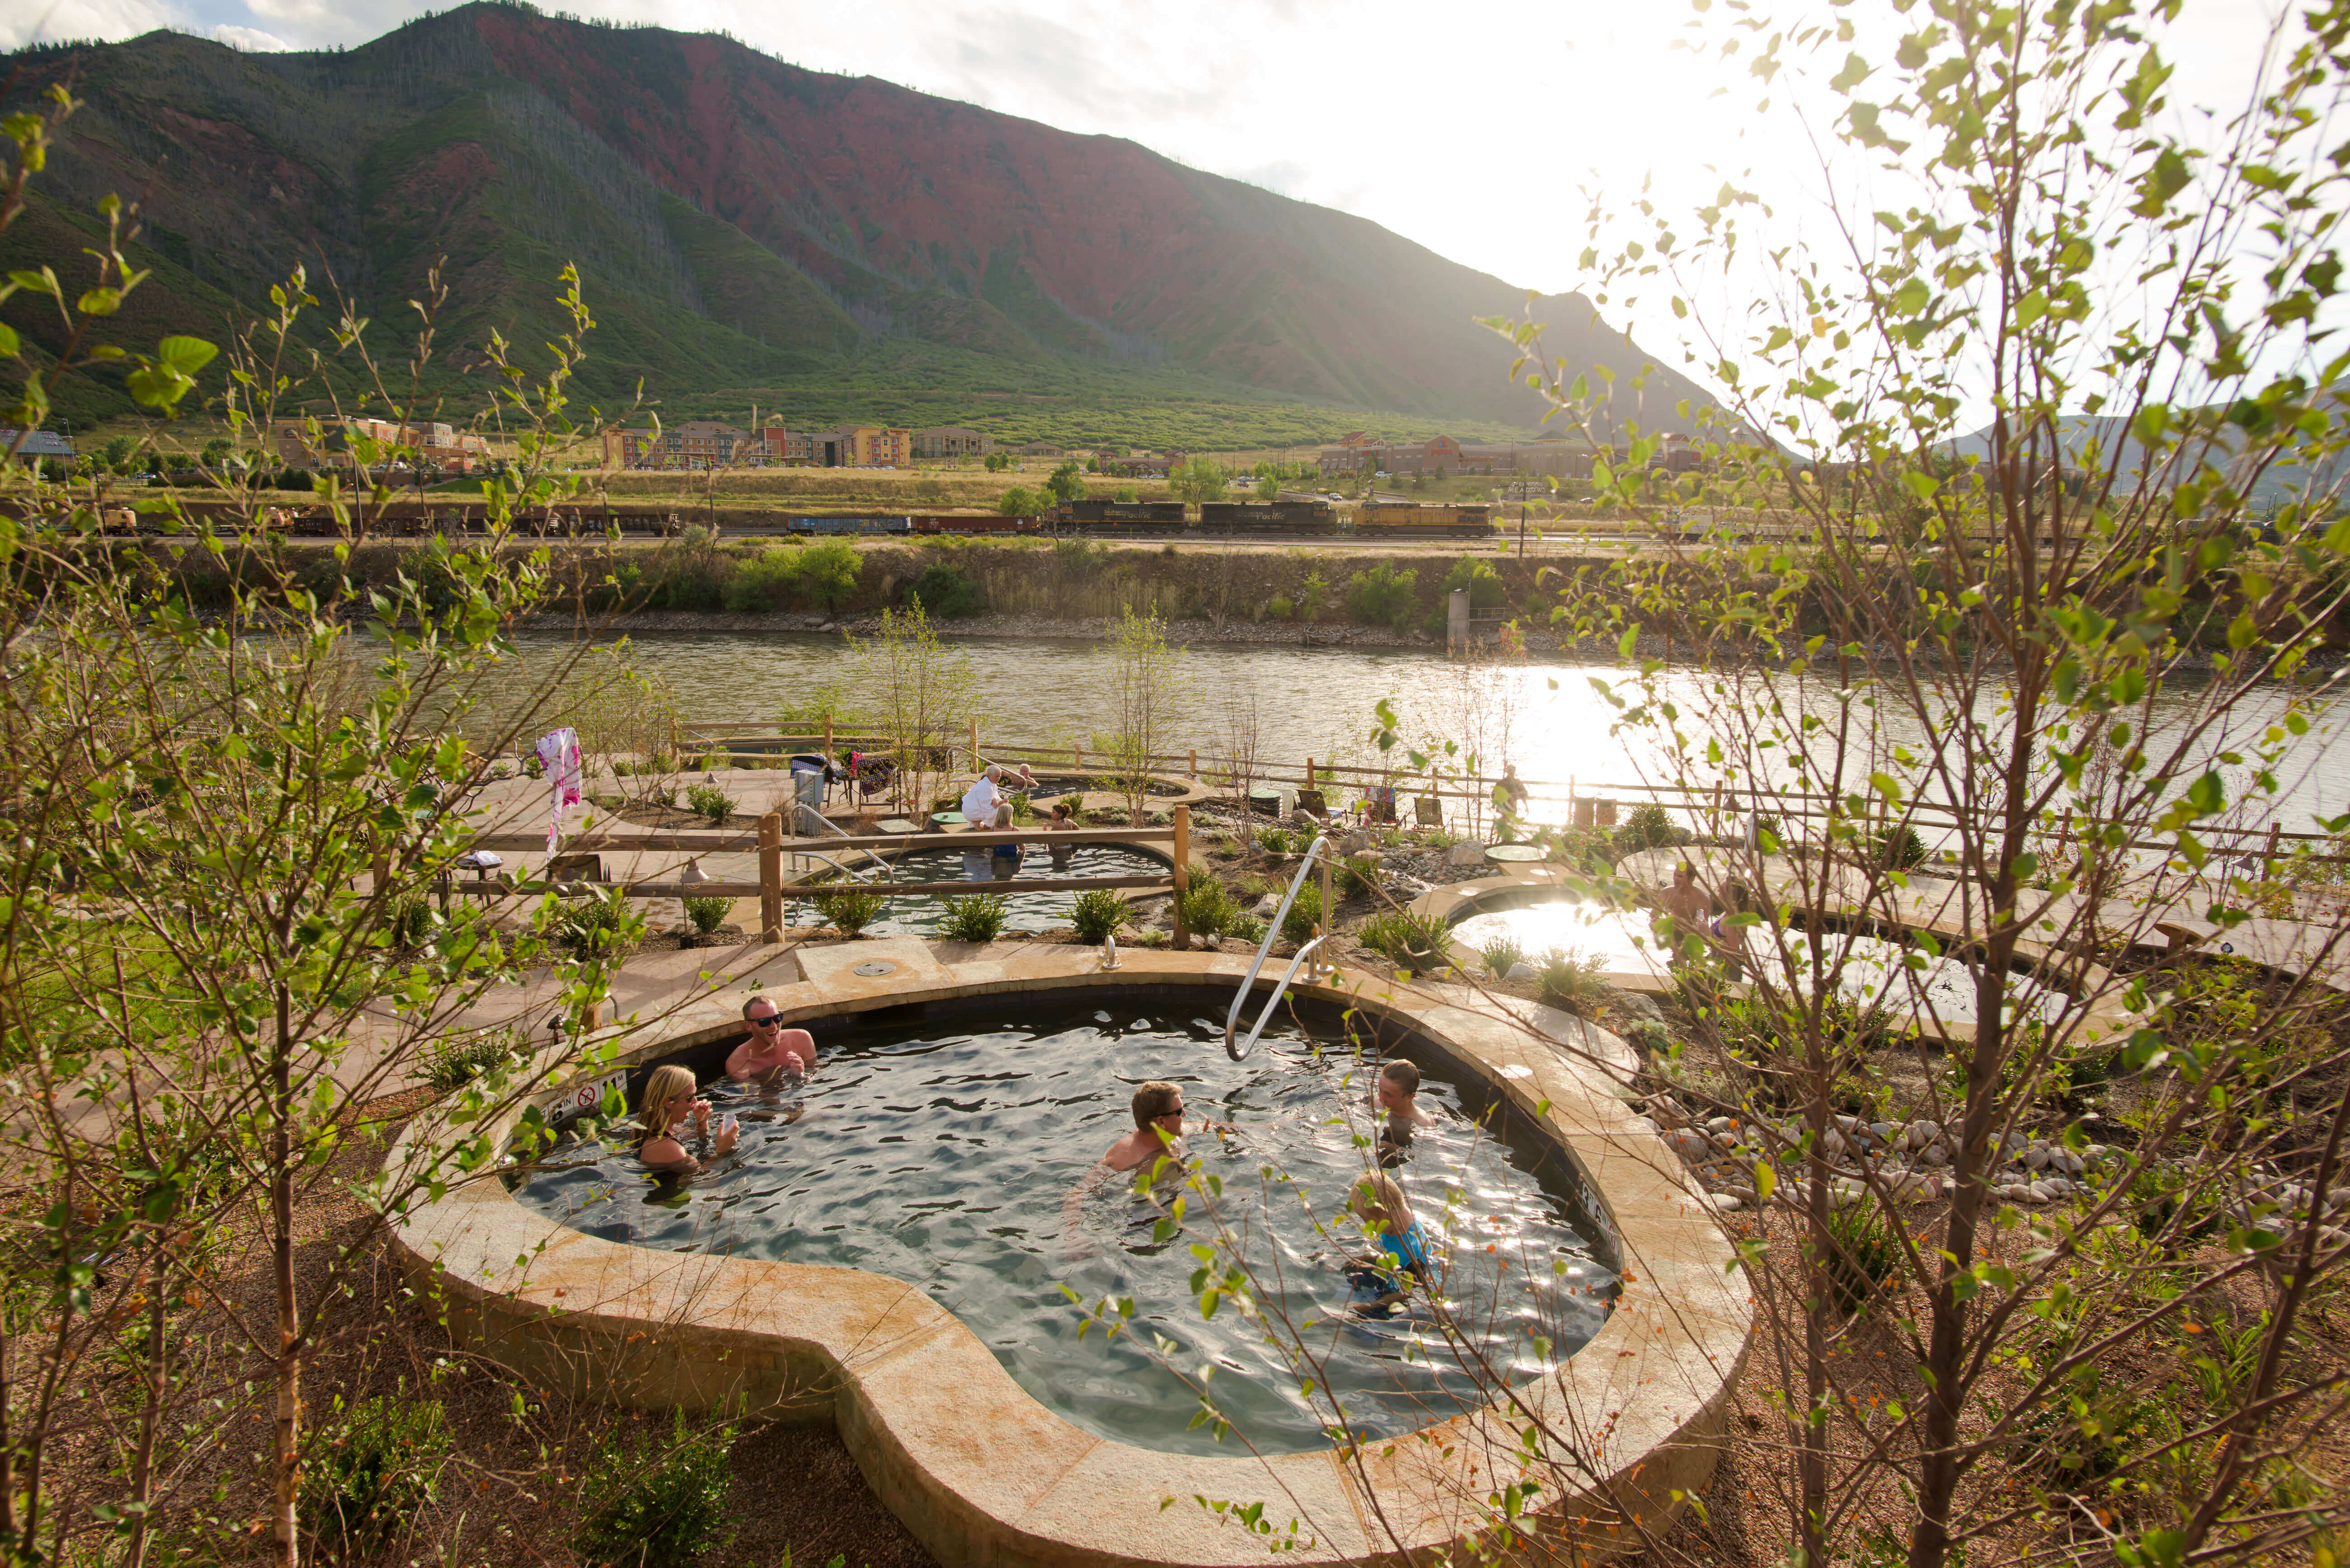 Soaking at Iron Mountain Hot Springs is a therapeutic wellness activity